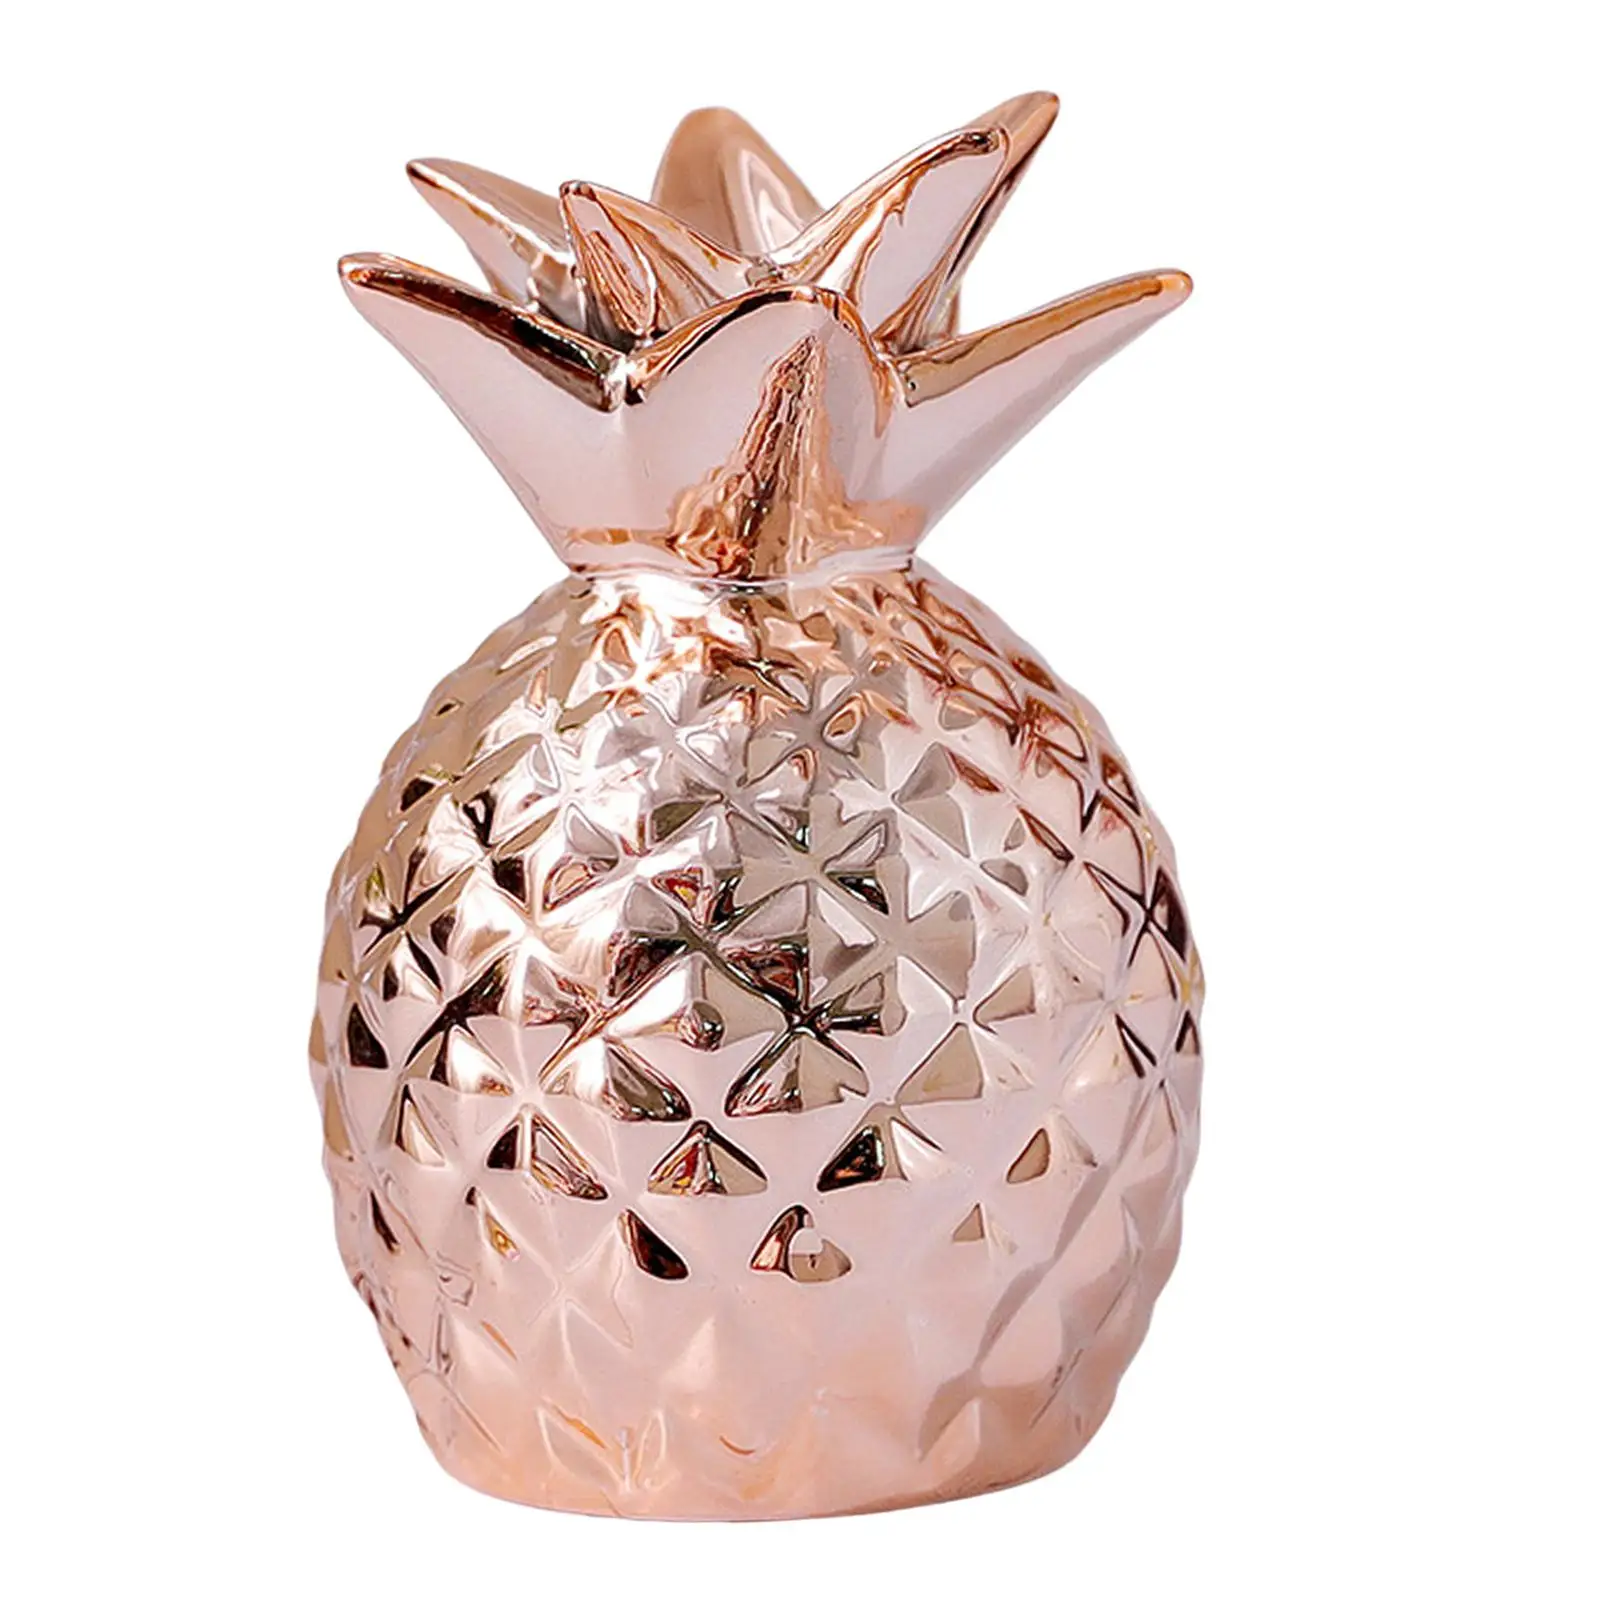 Pineapple Shape Money Box Storage Cans Saving box Decoration Sculpture Holder for Theme Party Apartment Office Bedroom